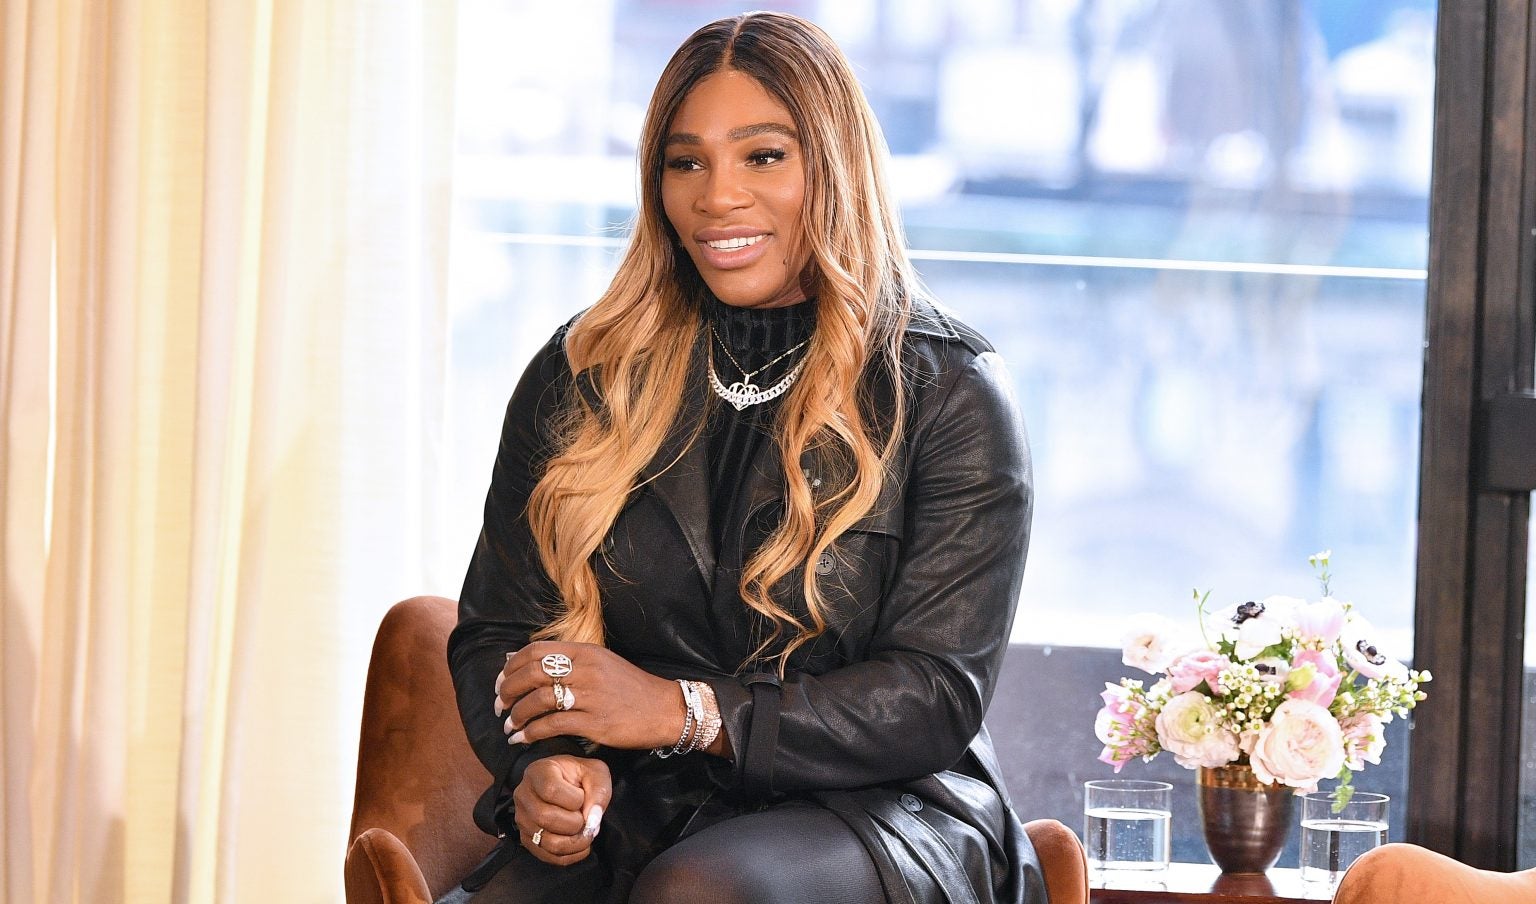 Serena Williams Just Gave A Word All Working Moms Can Relate To